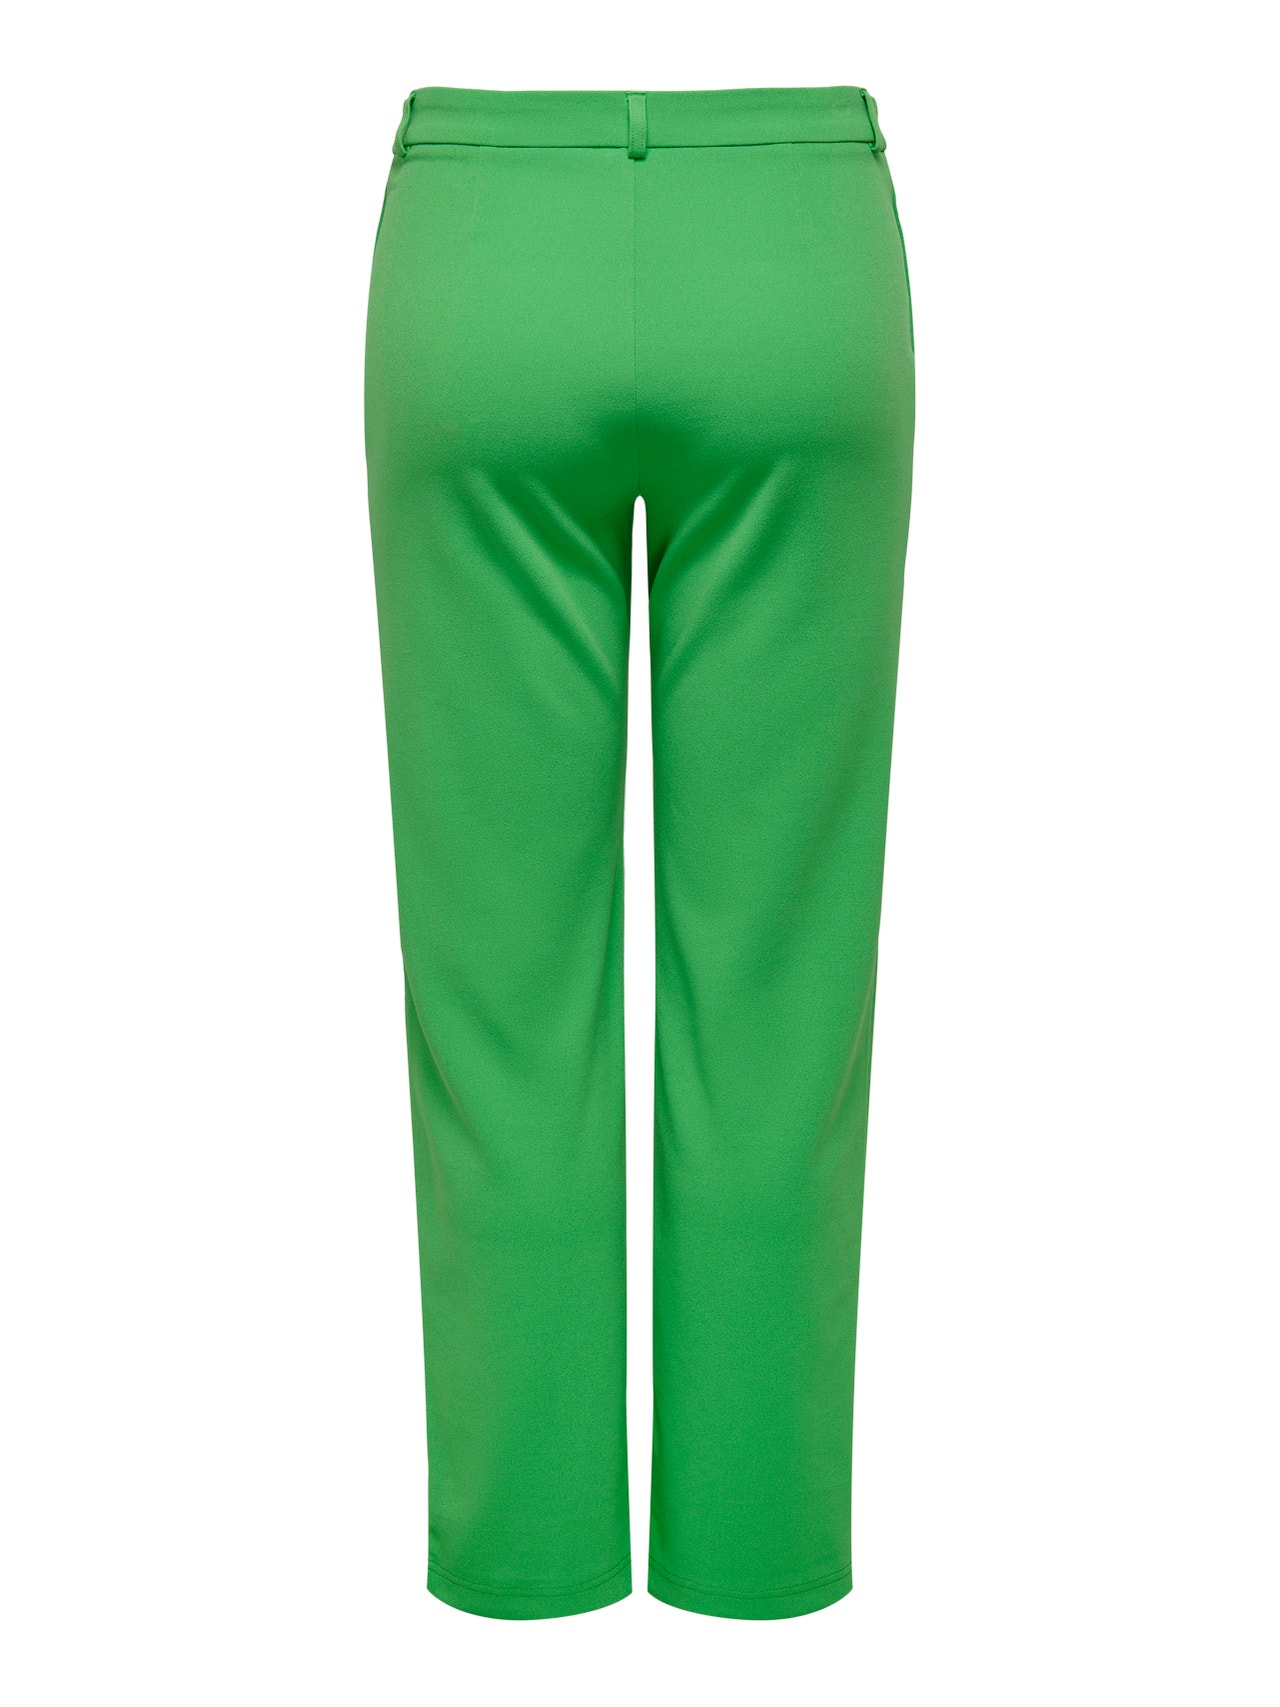 ONLY Straight fitted Trousers -Kelly Green - 15266403